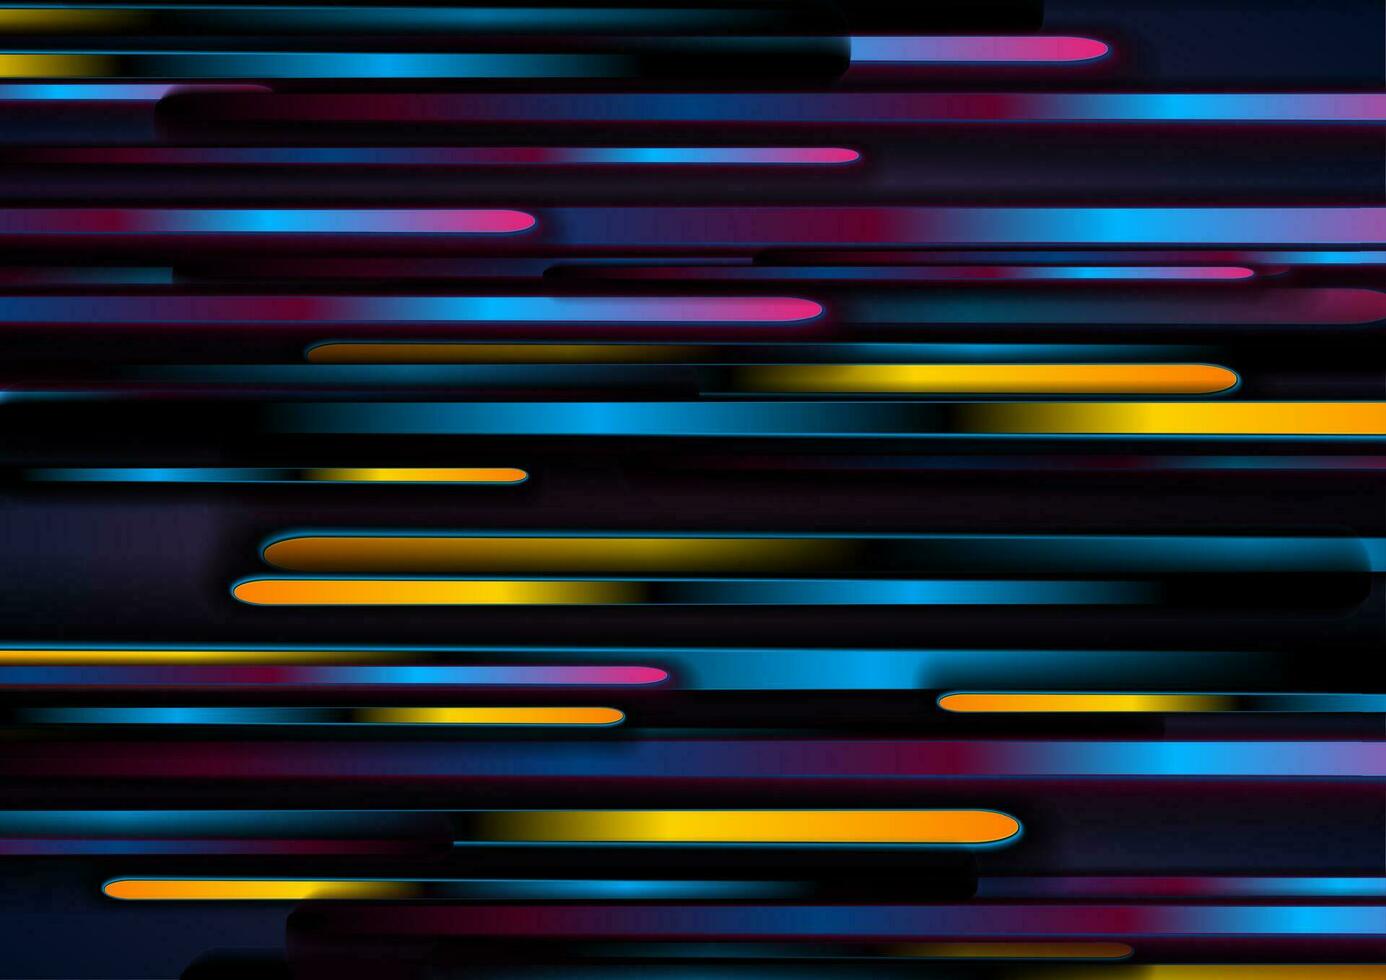 Dark colorful blurred stripes abstract tech background vector